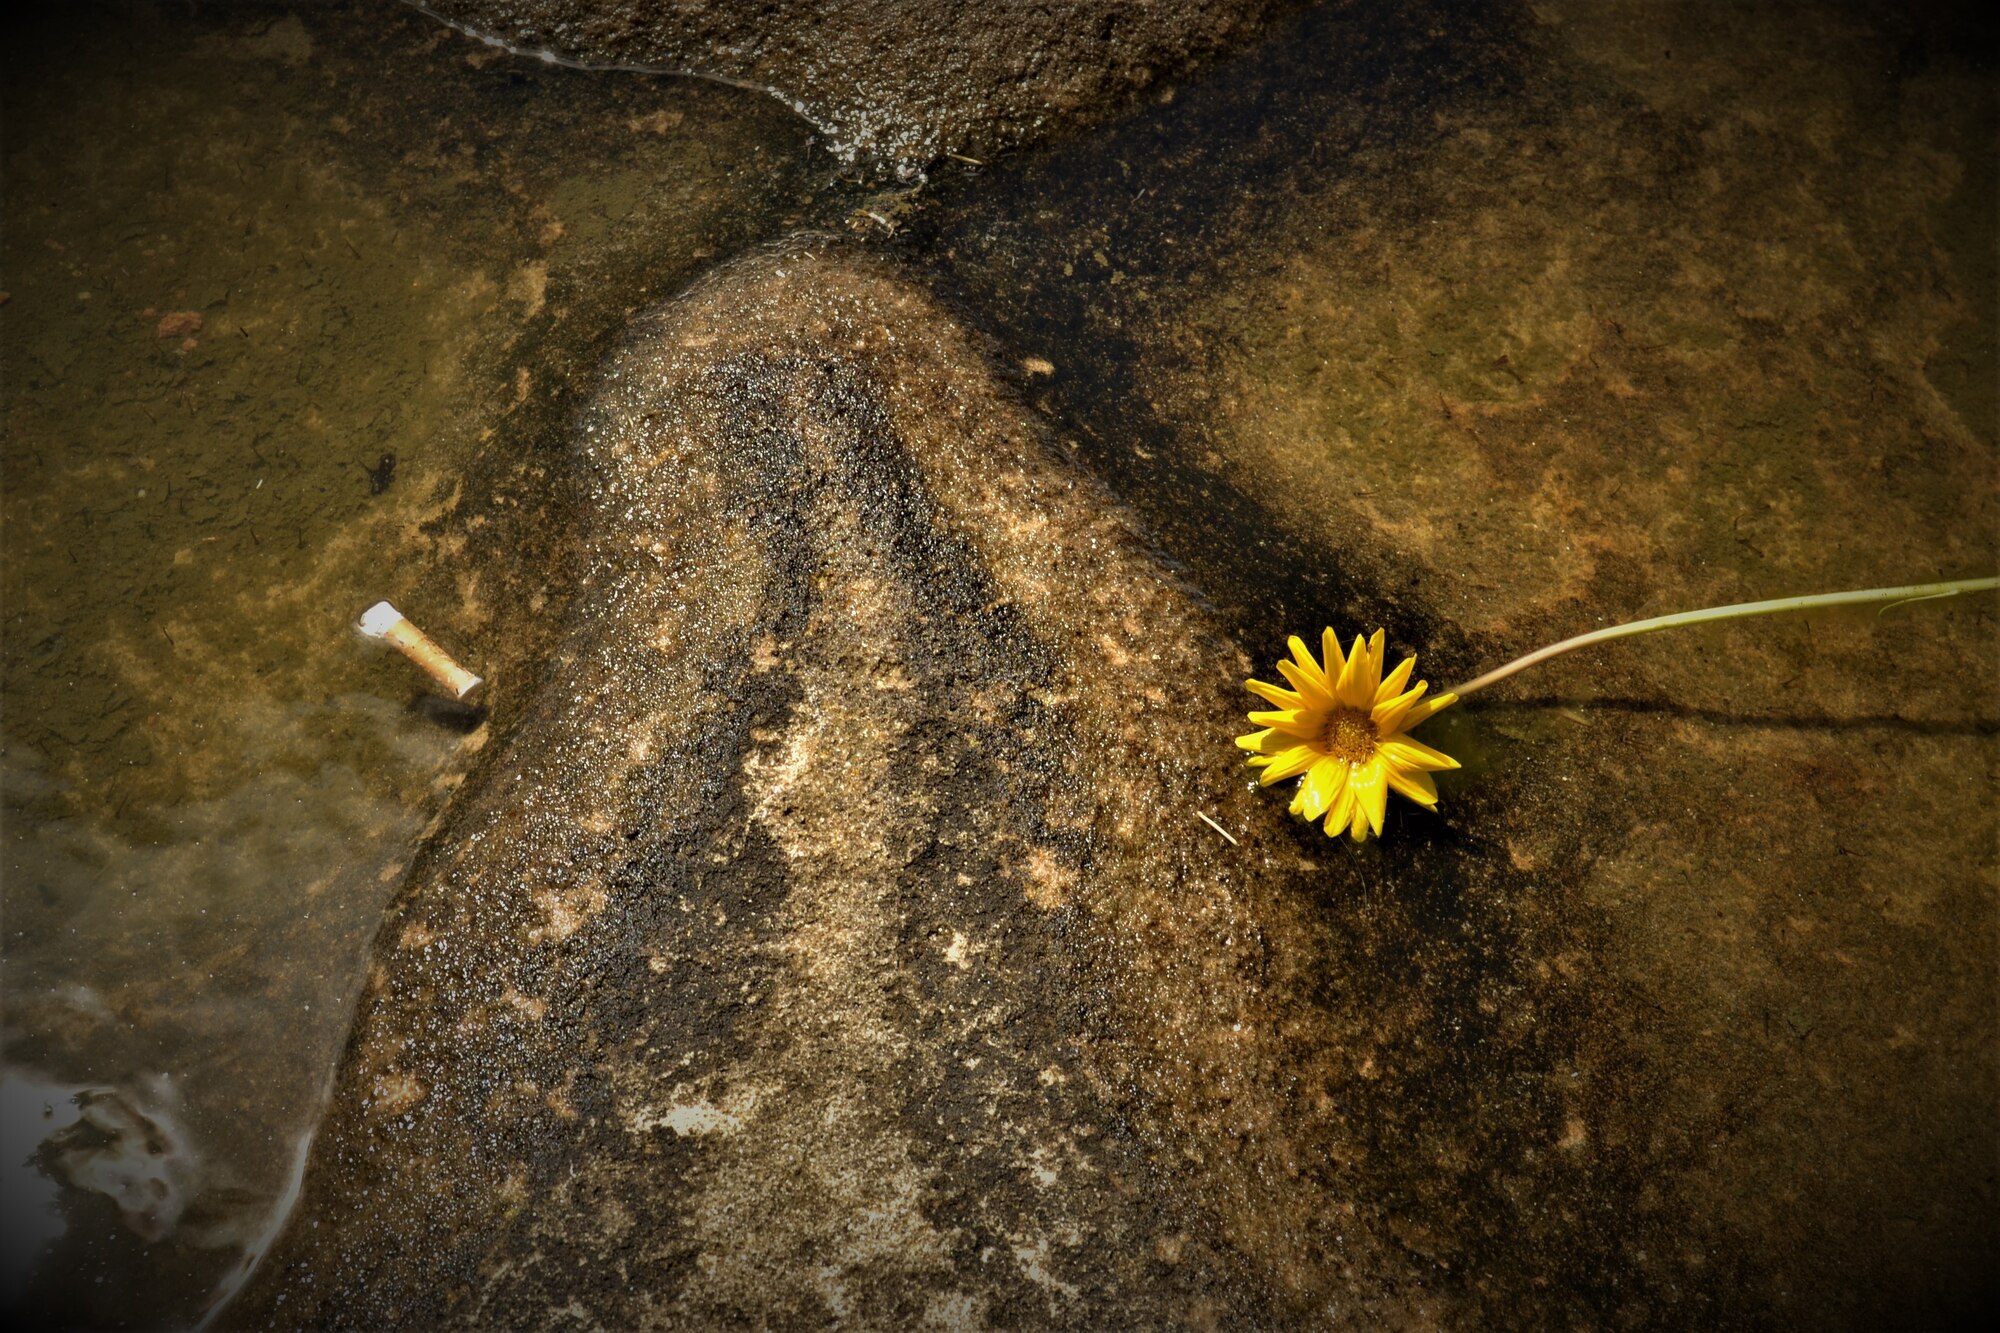 Photo shows a cigarette butt and a flower floating in water on the street.